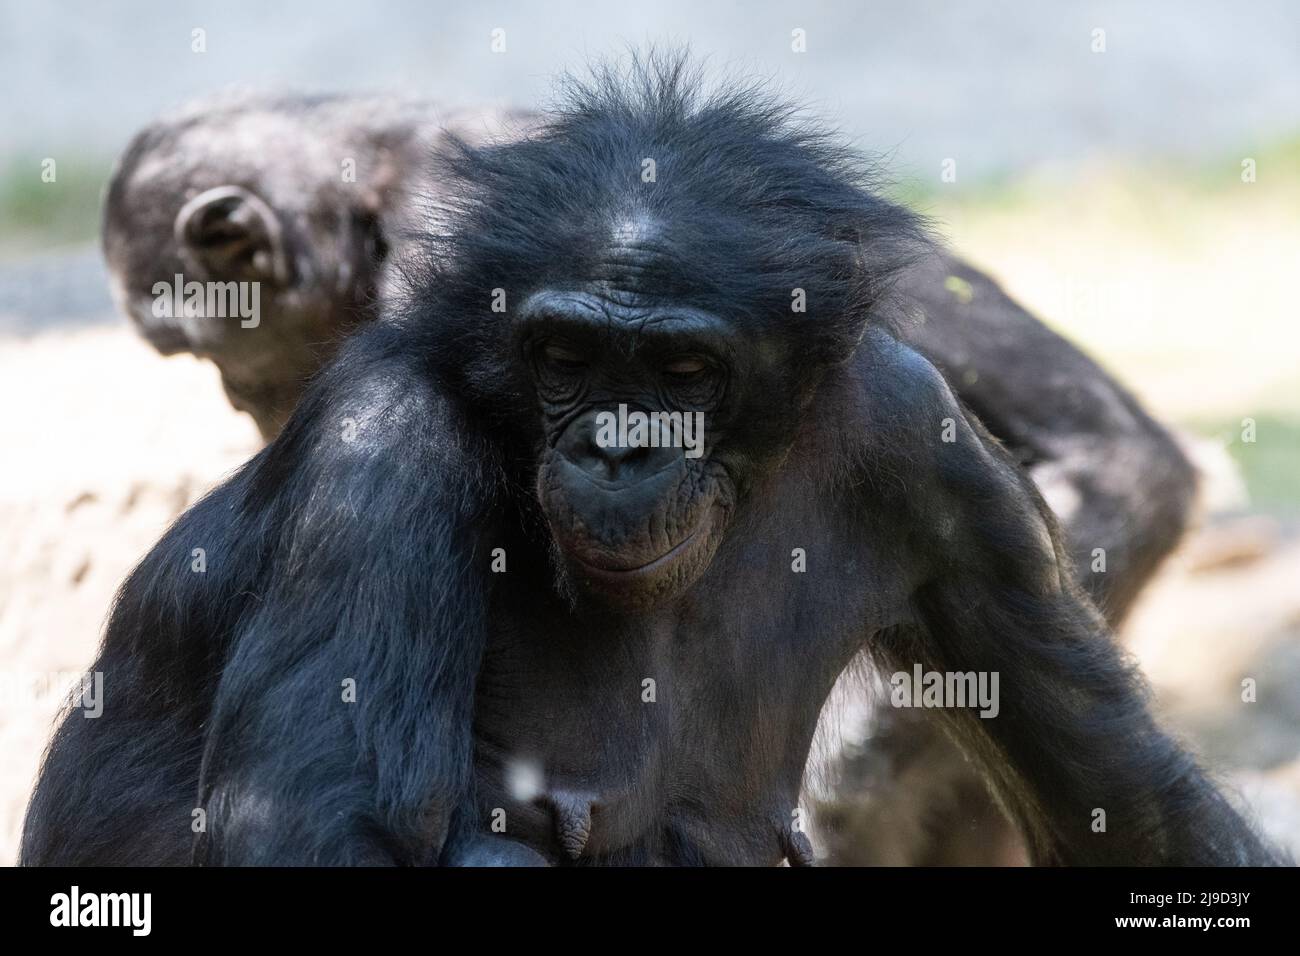 A female Bonobo, close relative of humans and chimpanzees, with crazy looking hair hanging out with other members of her troop on a sunny day. Stock Photo